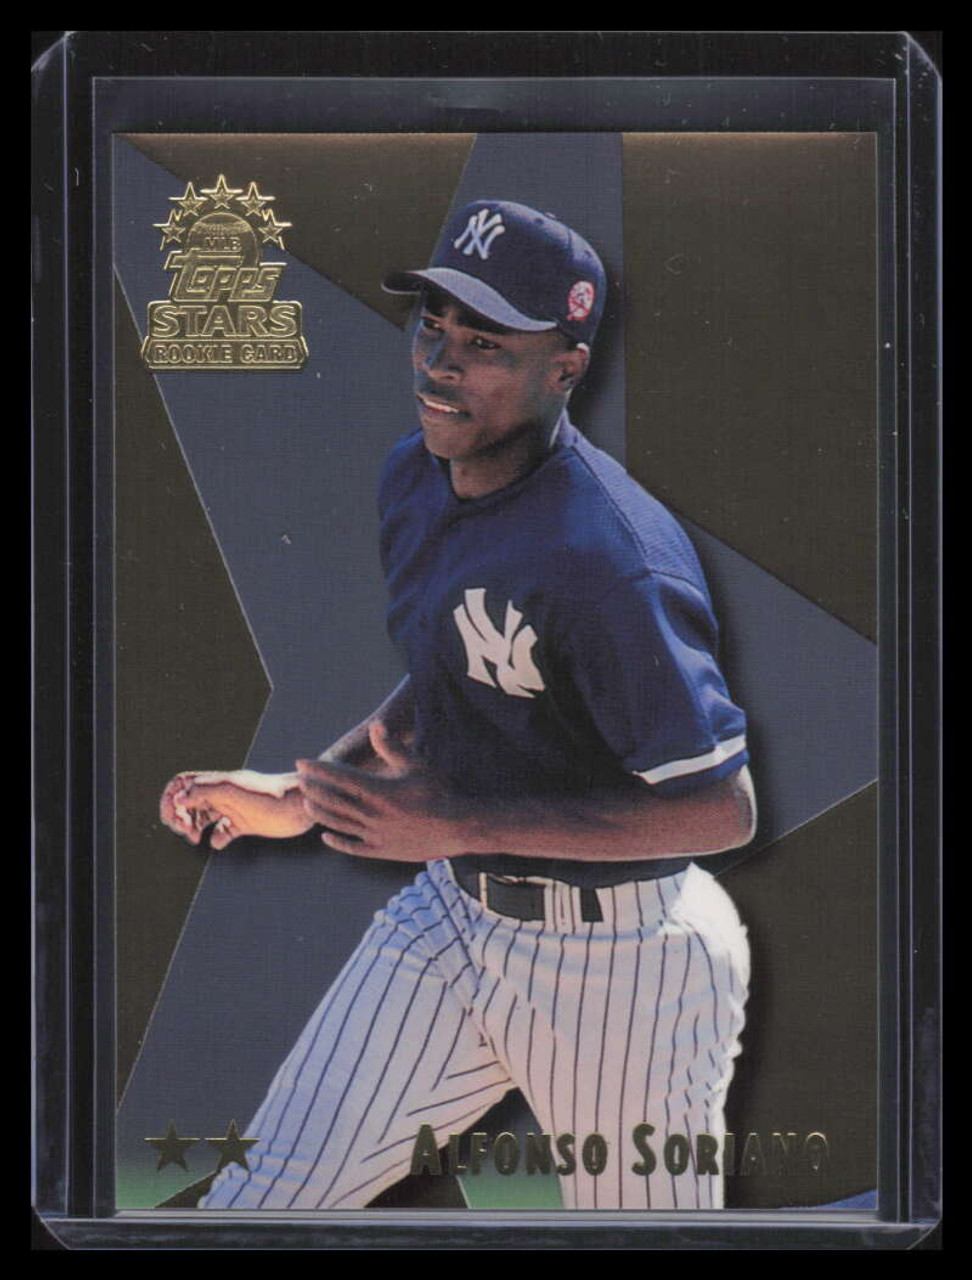 1999 Topps Stars Two Star Foil 34 Alfonso Soriano Rookie 103/199 -  Sportsnut Cards